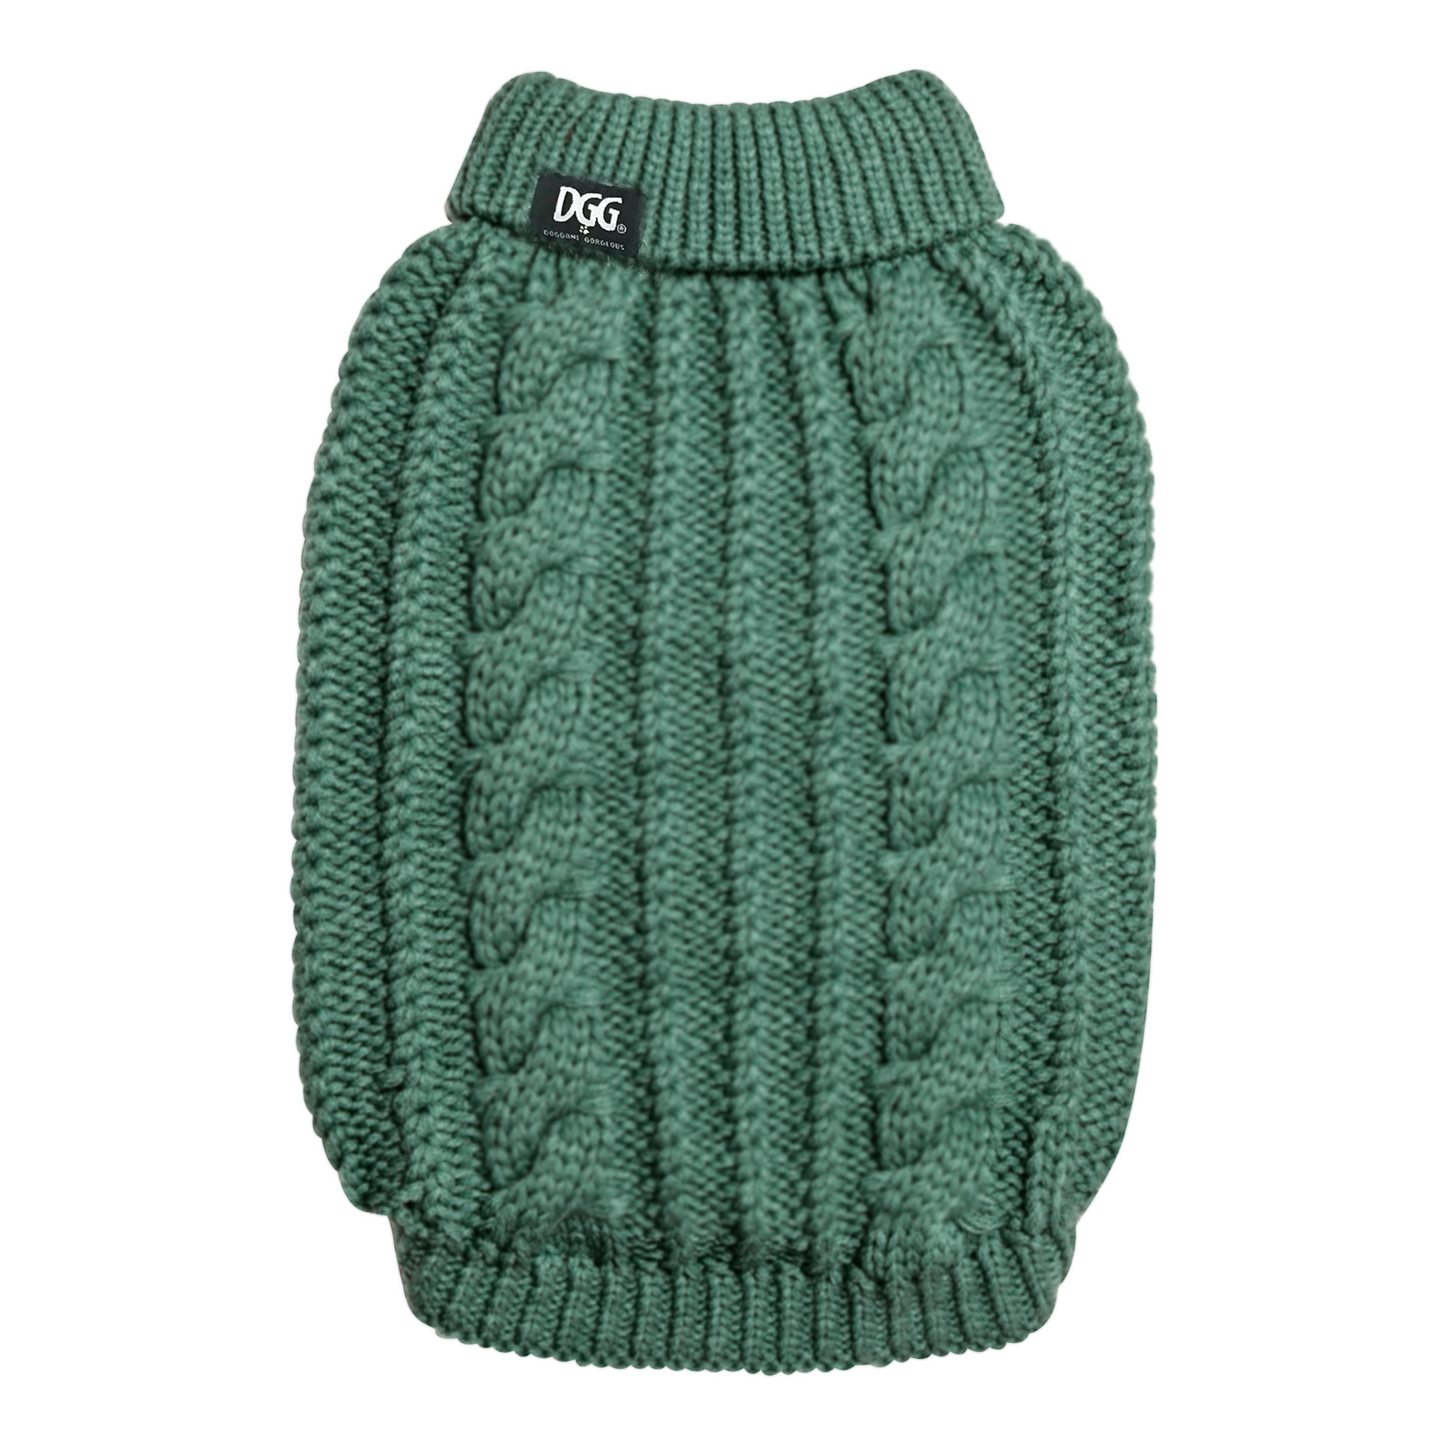 DGG Moss Green Fluffy Cable Knitted Dog Jumper